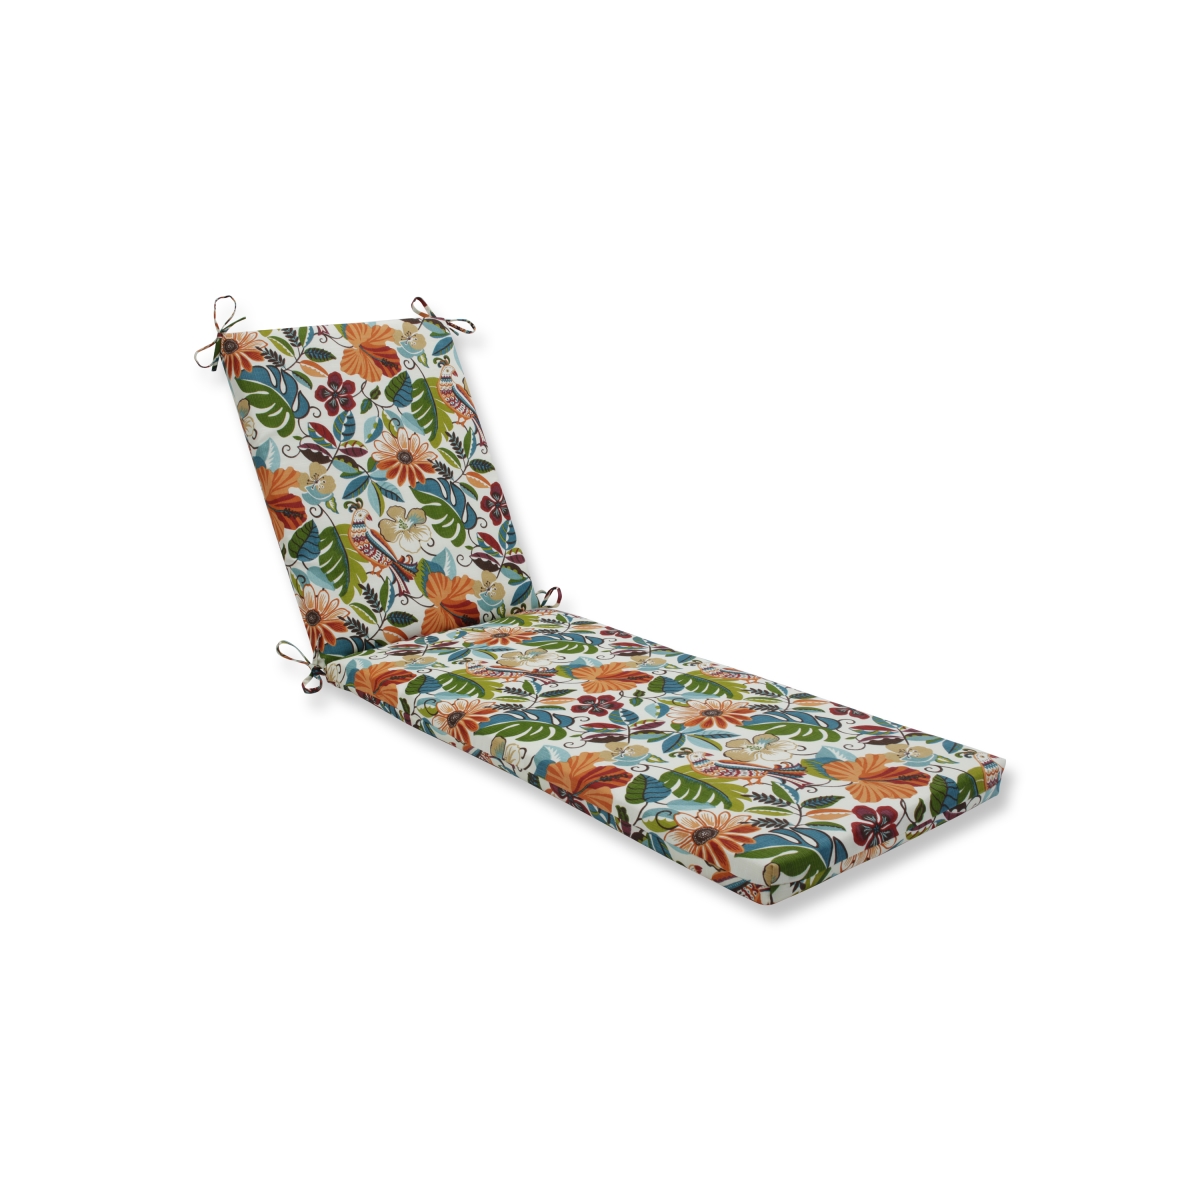 80 X 23 X 3 In. Outdoor & Indoor Lensing Jungle Chaise Lounge Cushion, Off-white